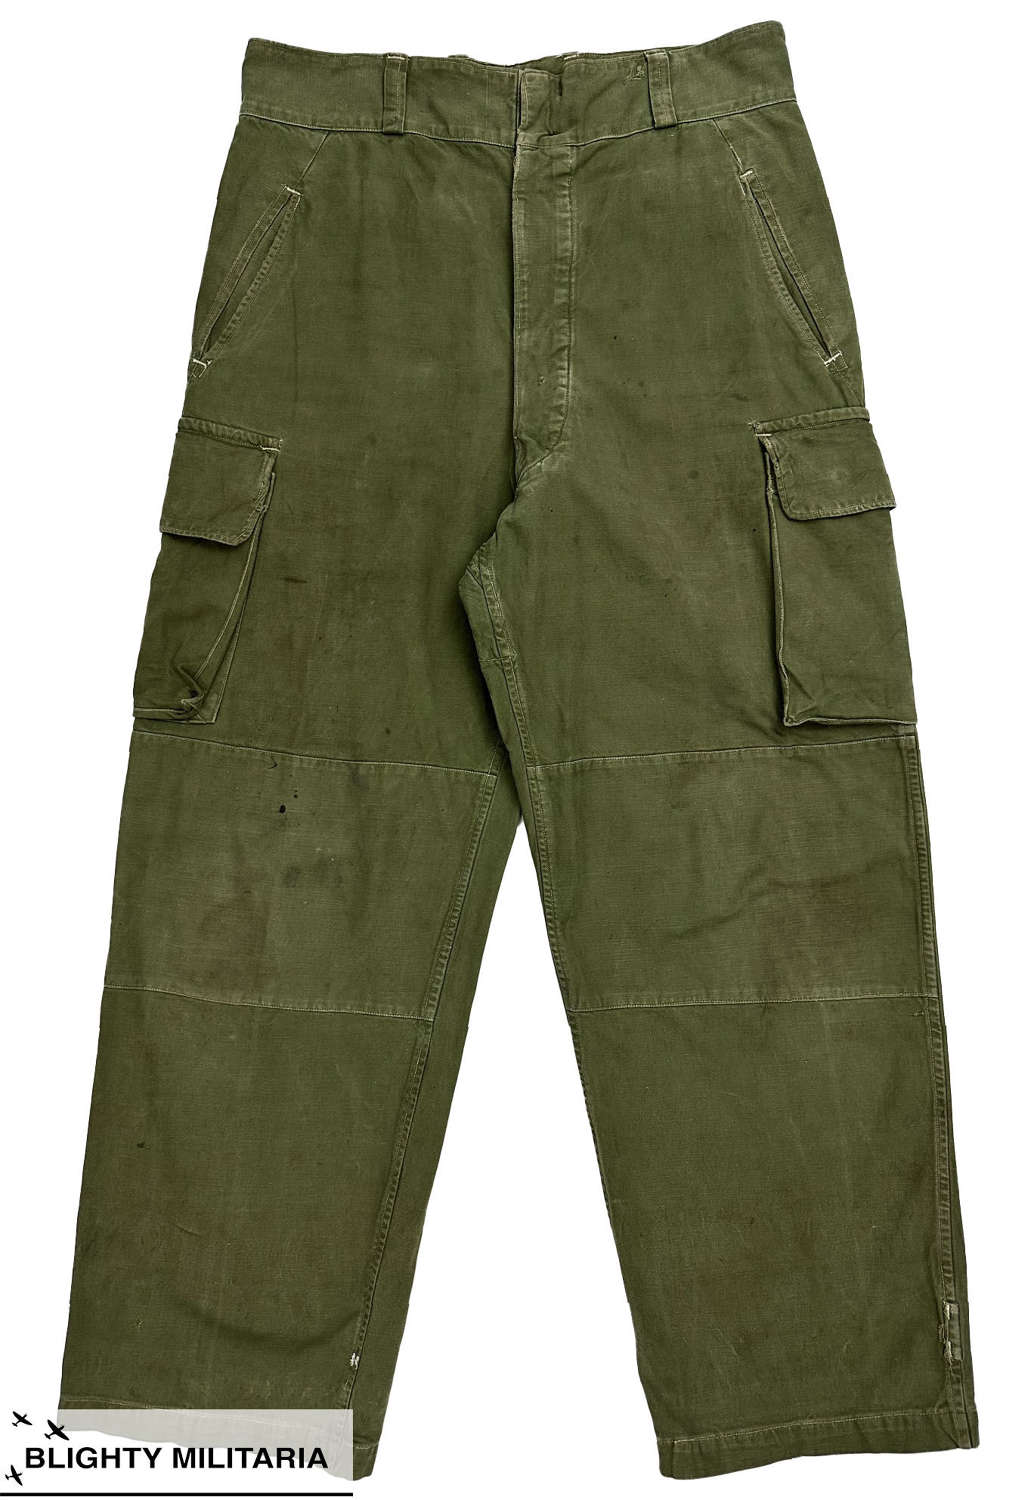 Original 1950s French M47 Trousers - Size 35 x 30